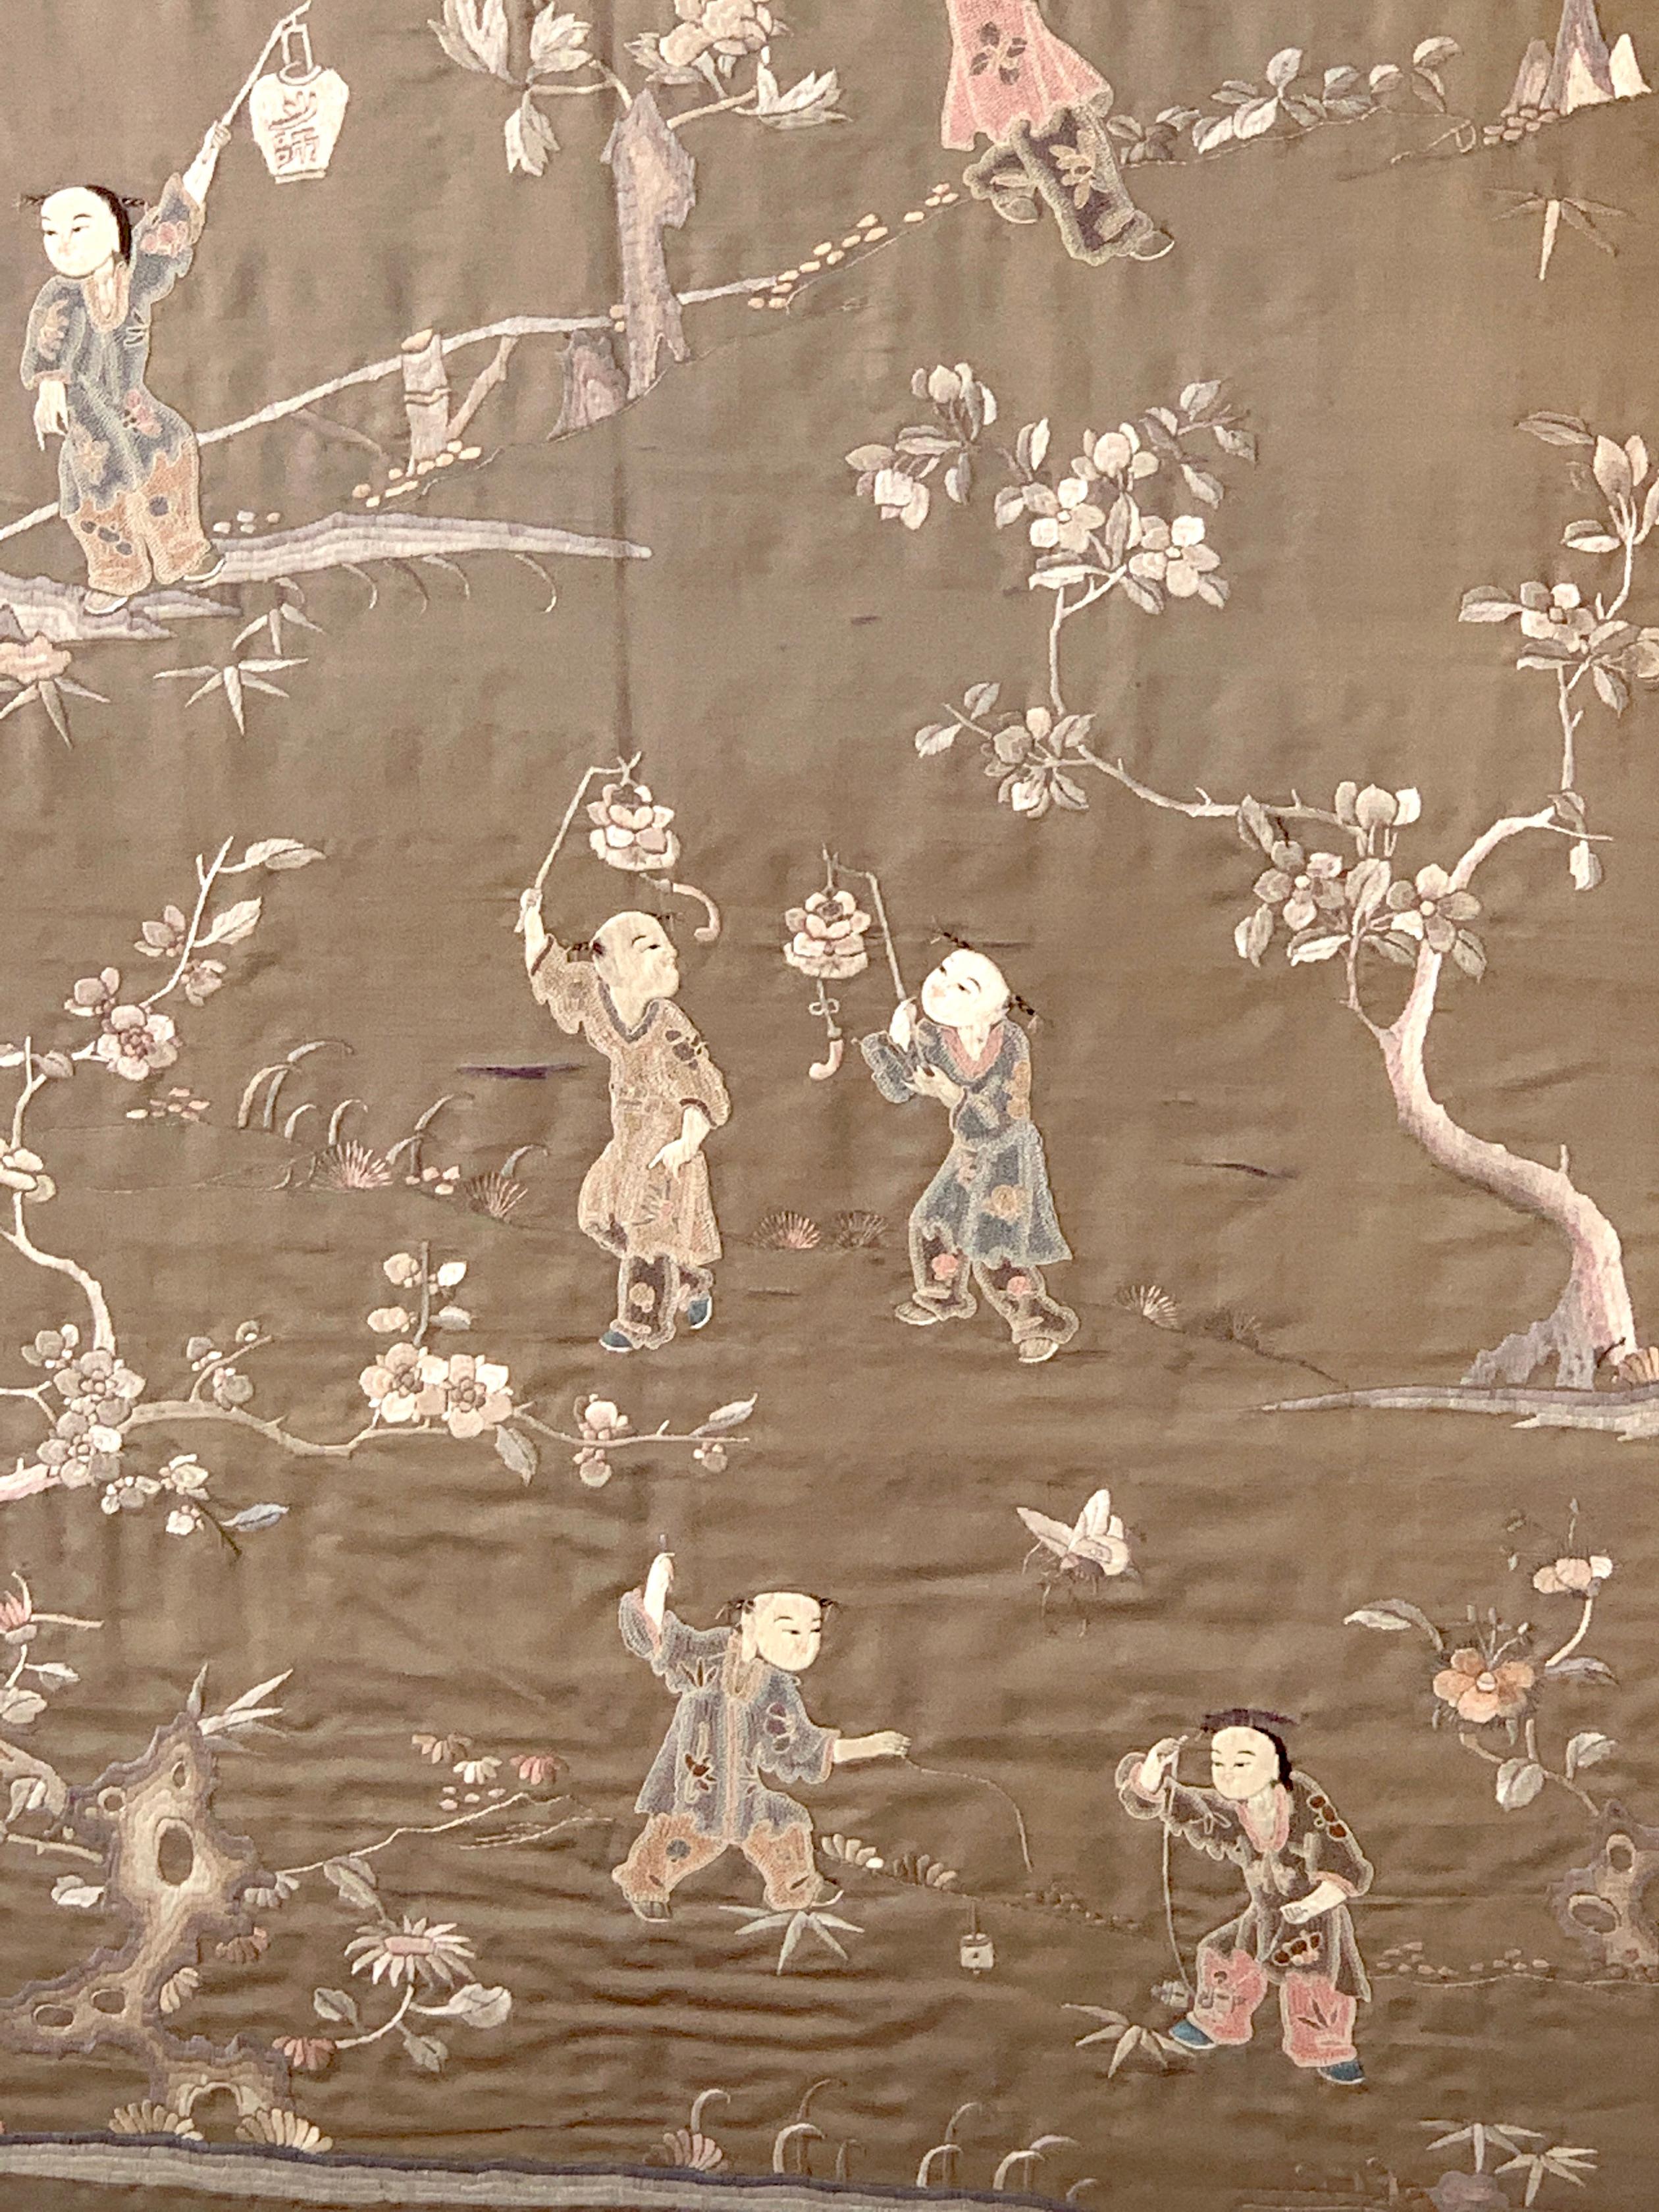 Exquisite Chinese Export Landscape Silk Embroidery For Sale 1